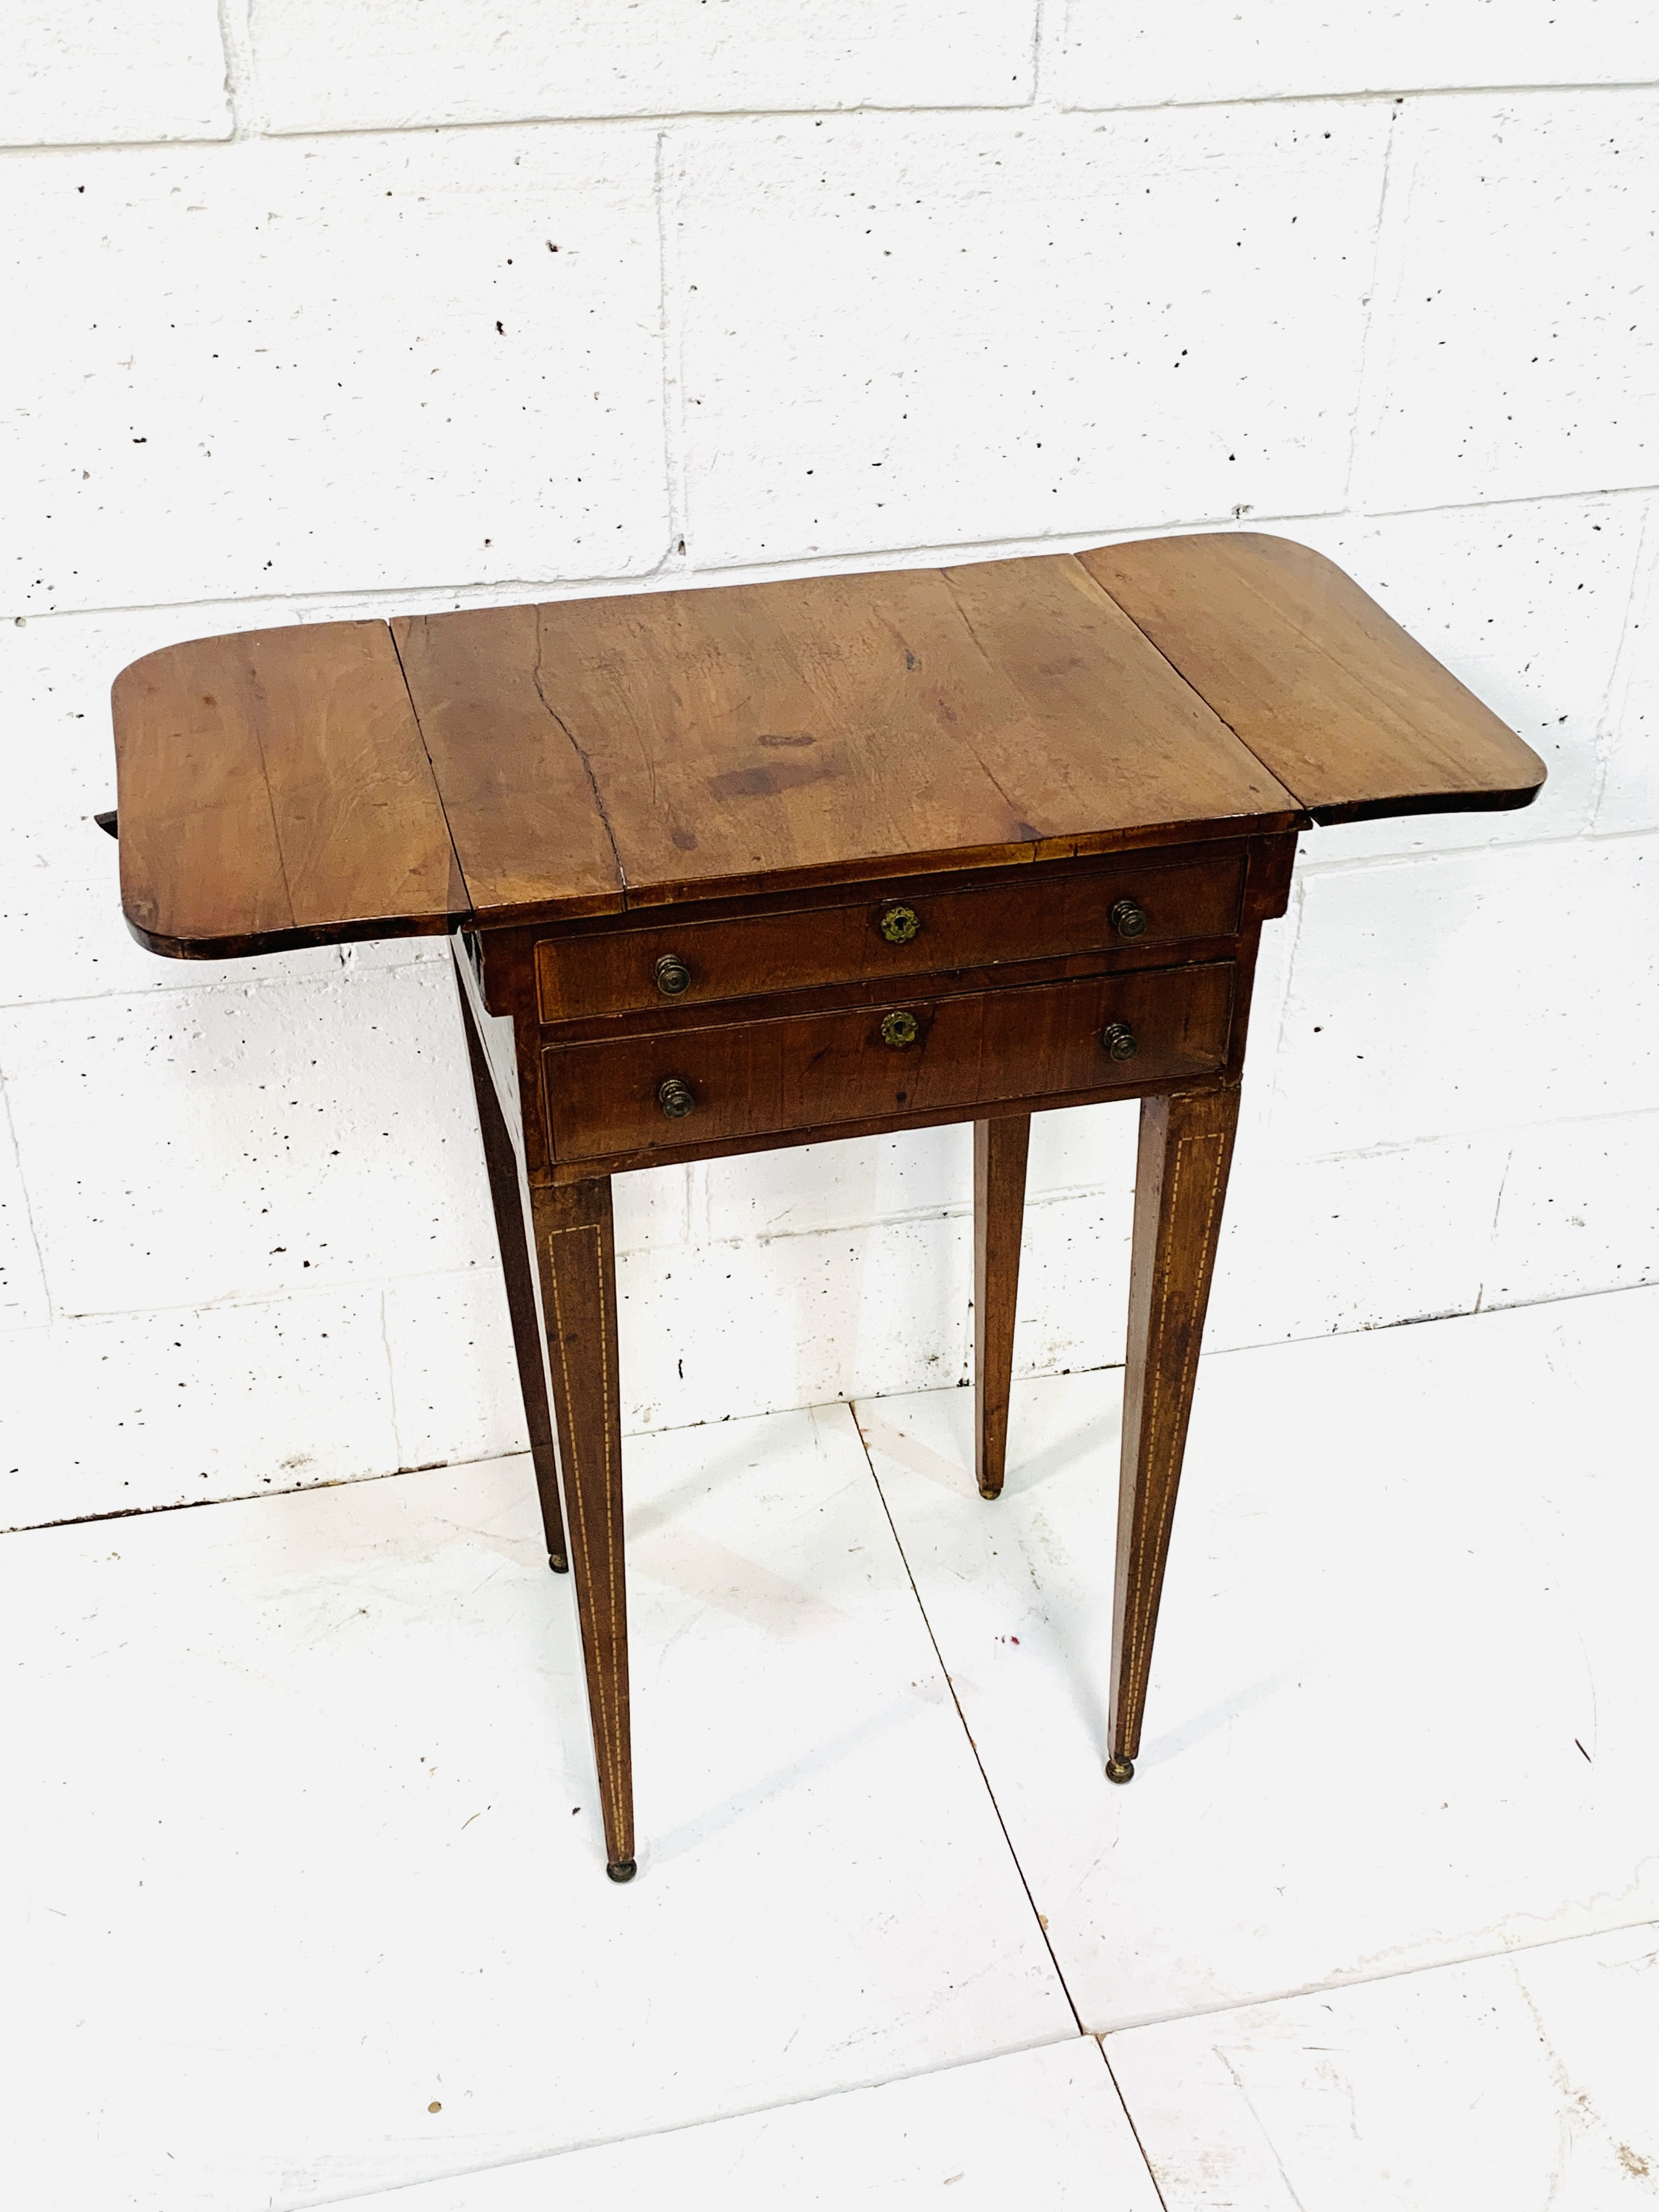 Regency inlaid mahogany small drop side table - Image 3 of 5